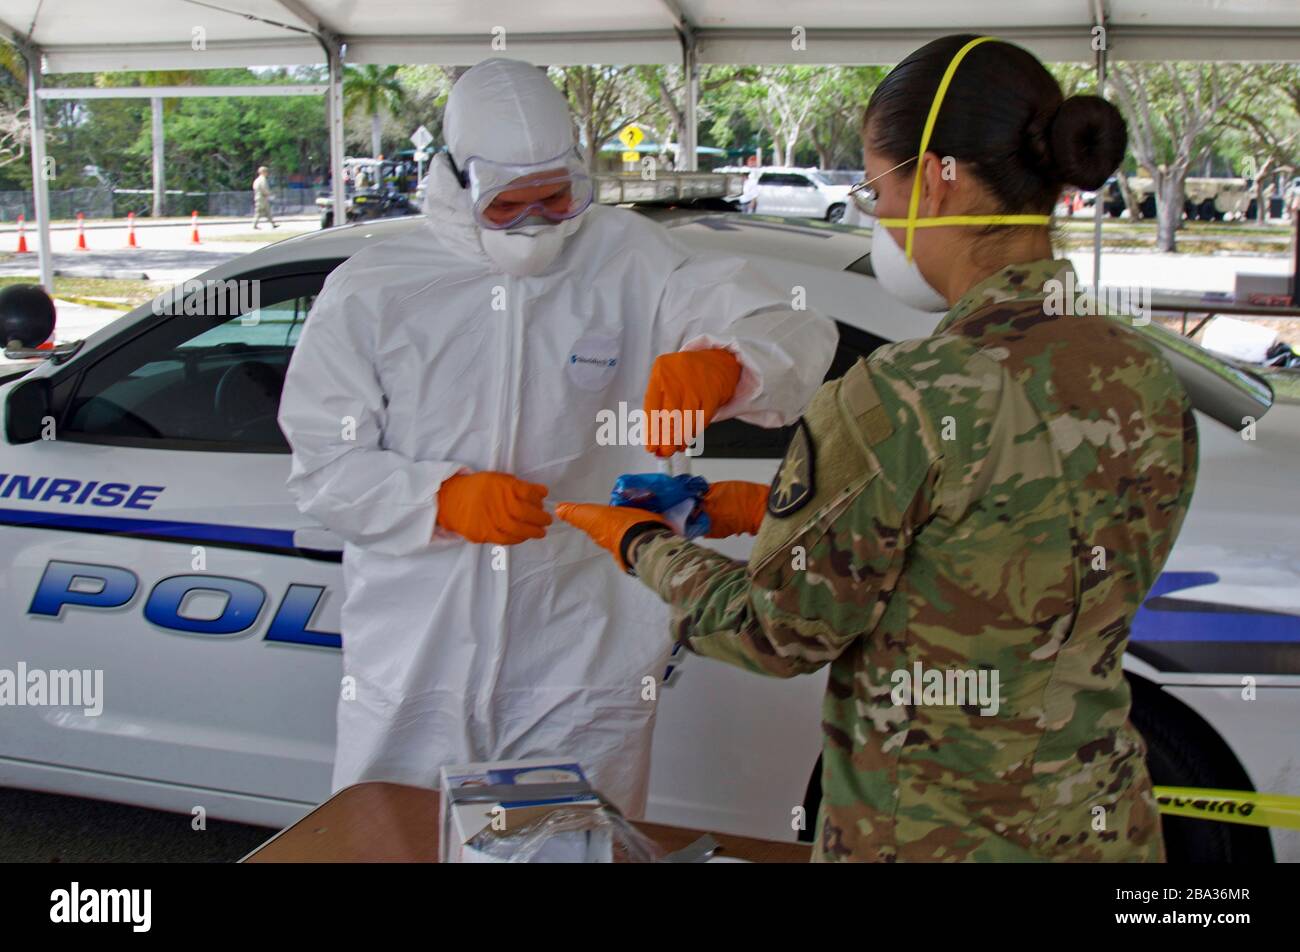 Florida National Guard members bag a nasal sample from a First Responder for testing at the drive-through COVID-19 Mobile Testing Center located at C.B. Smith Park March 19, 2020 in Pembroke Pines, Florida. Stock Photo